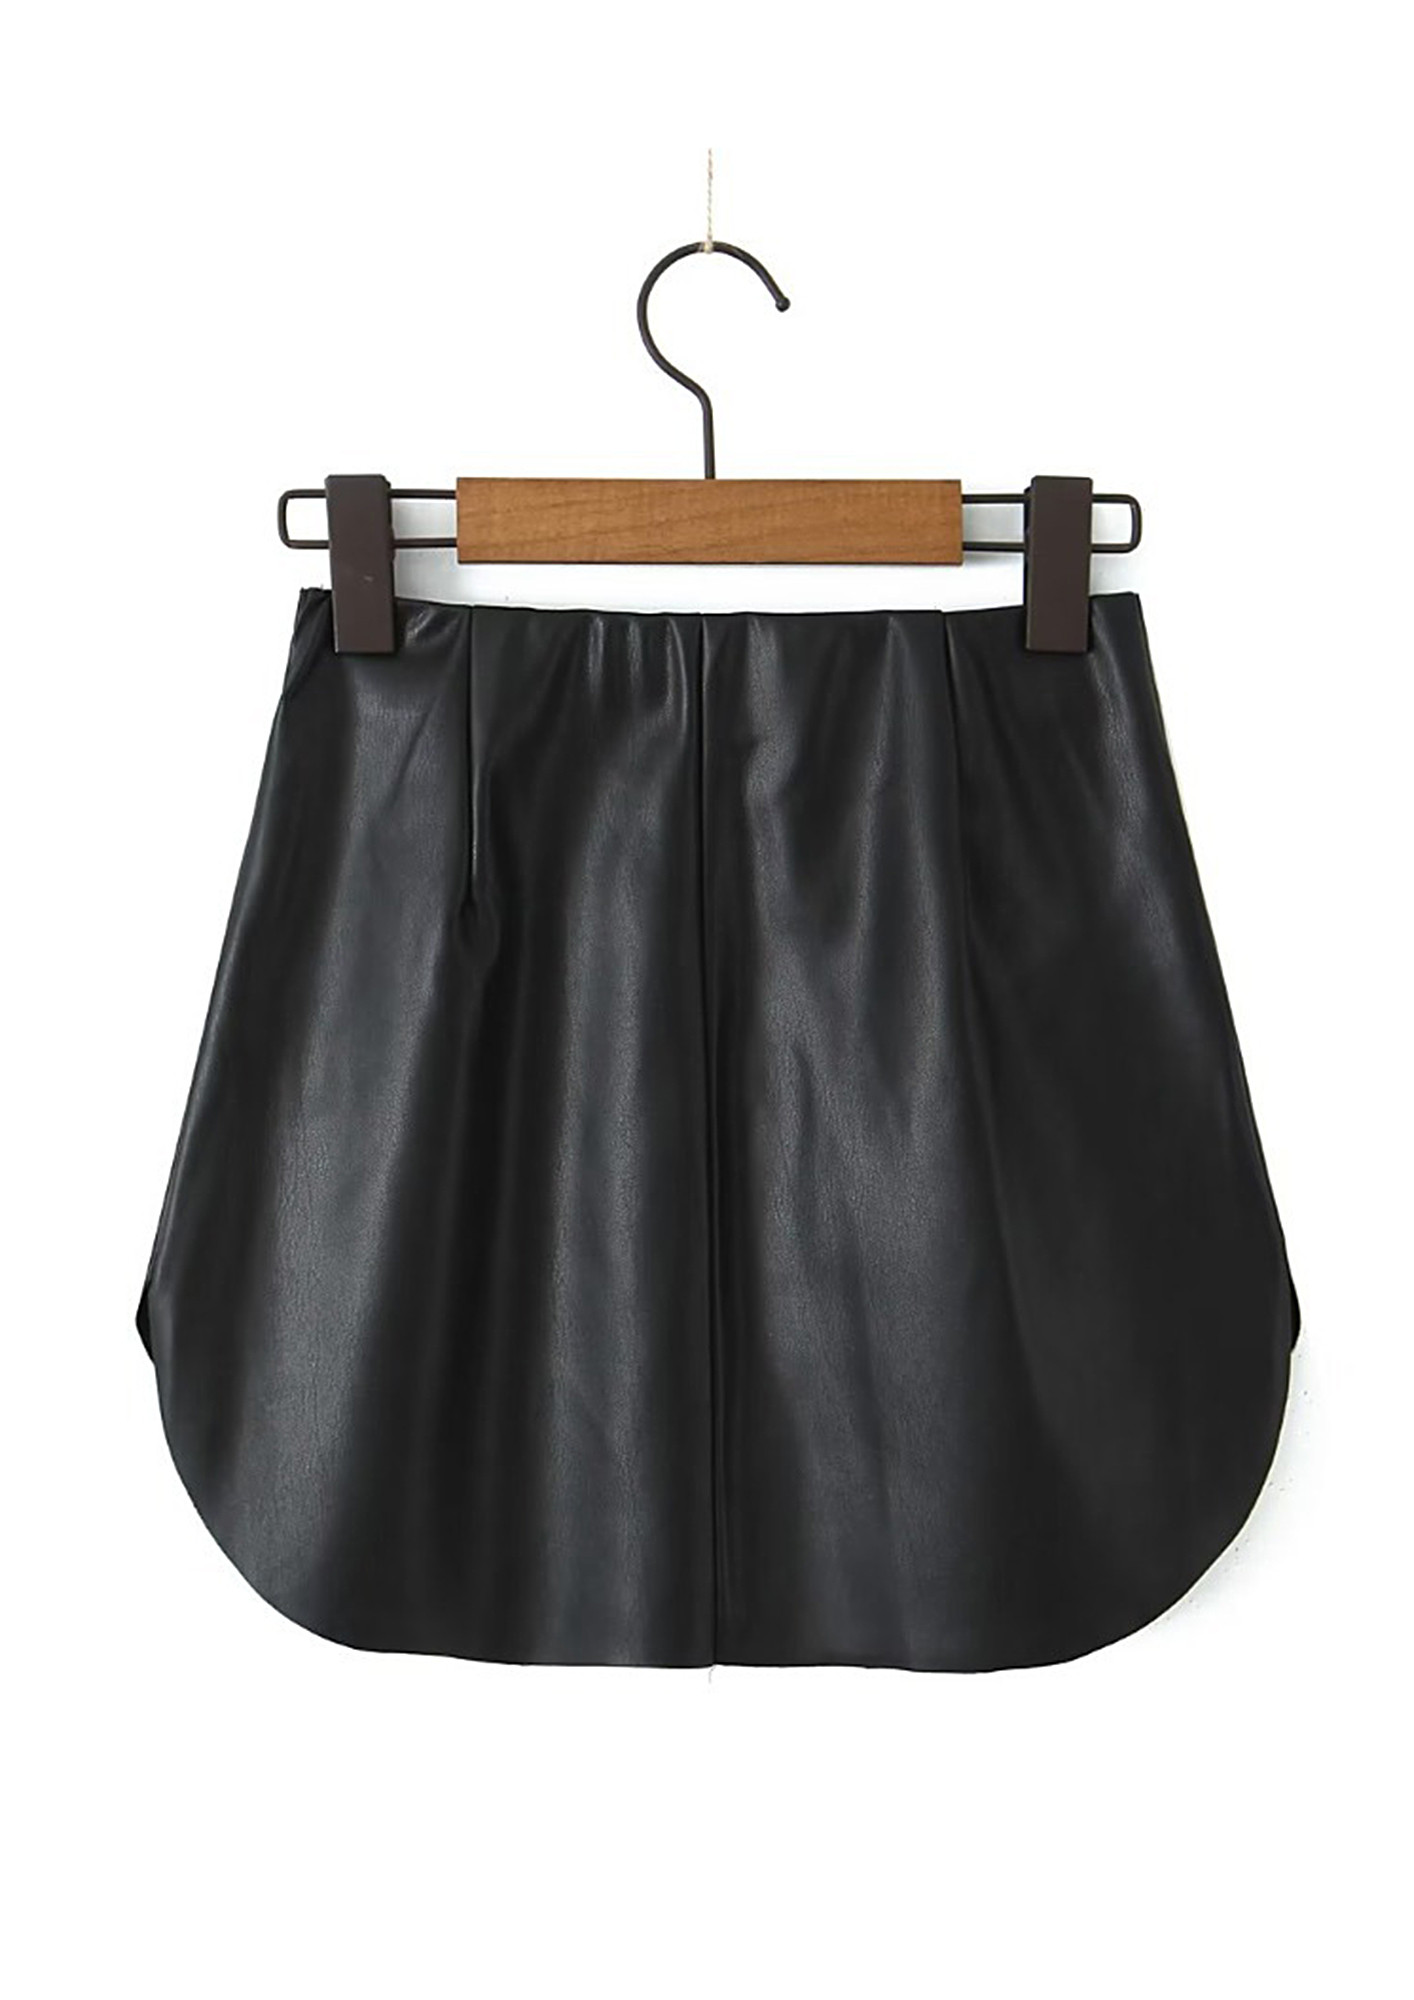 LEATHER SKIRTS: HOW TO STYLE THEM AND WHERE TO BUY THEM - Chani Lillian